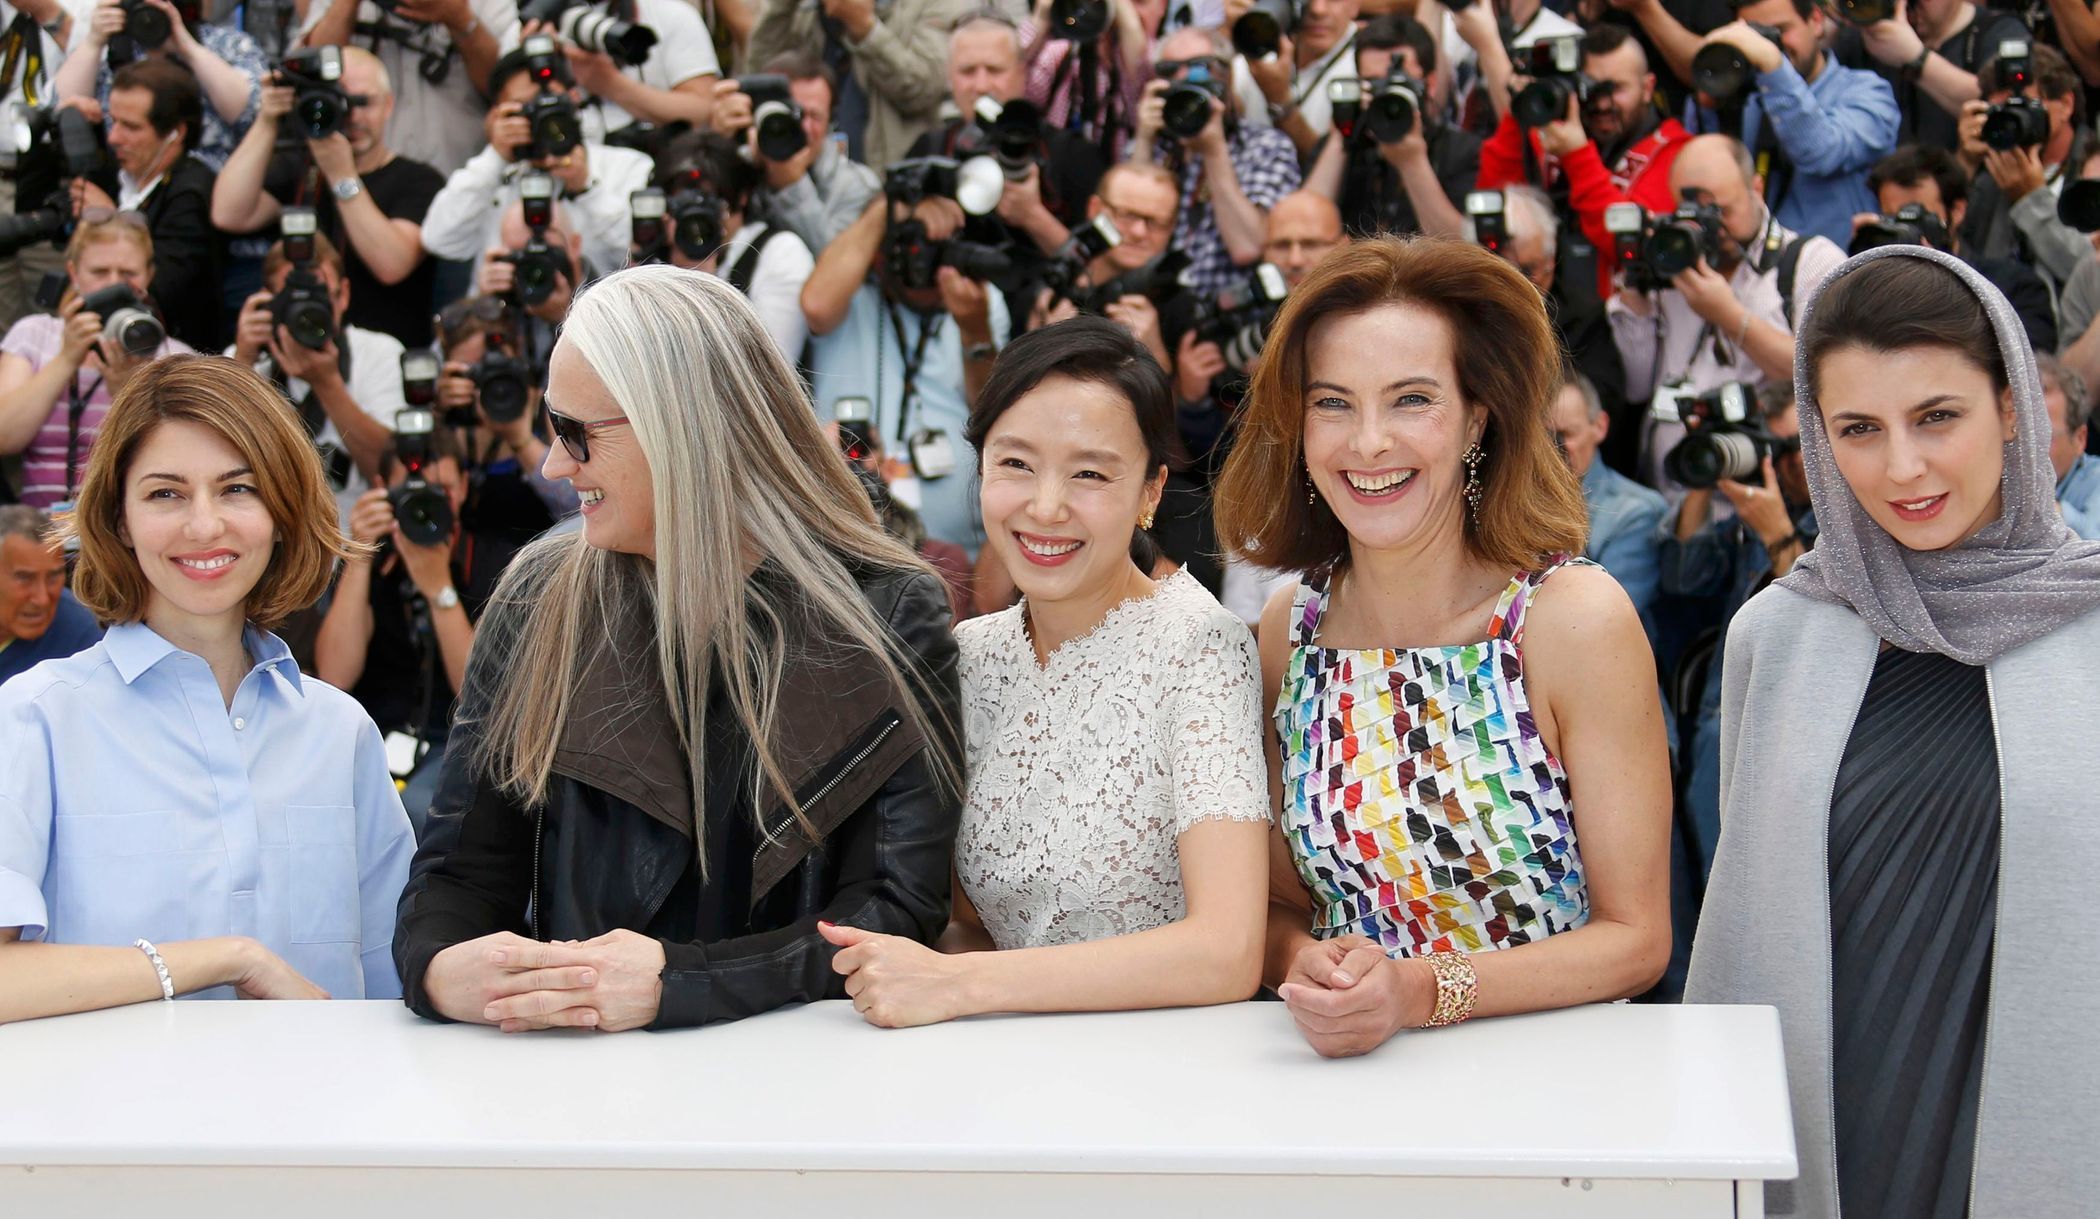 Jury President Jane Campion and jury members of the 67th Cannes Film Festival pose during a photocall before the opening of the Film Festival in Cannes